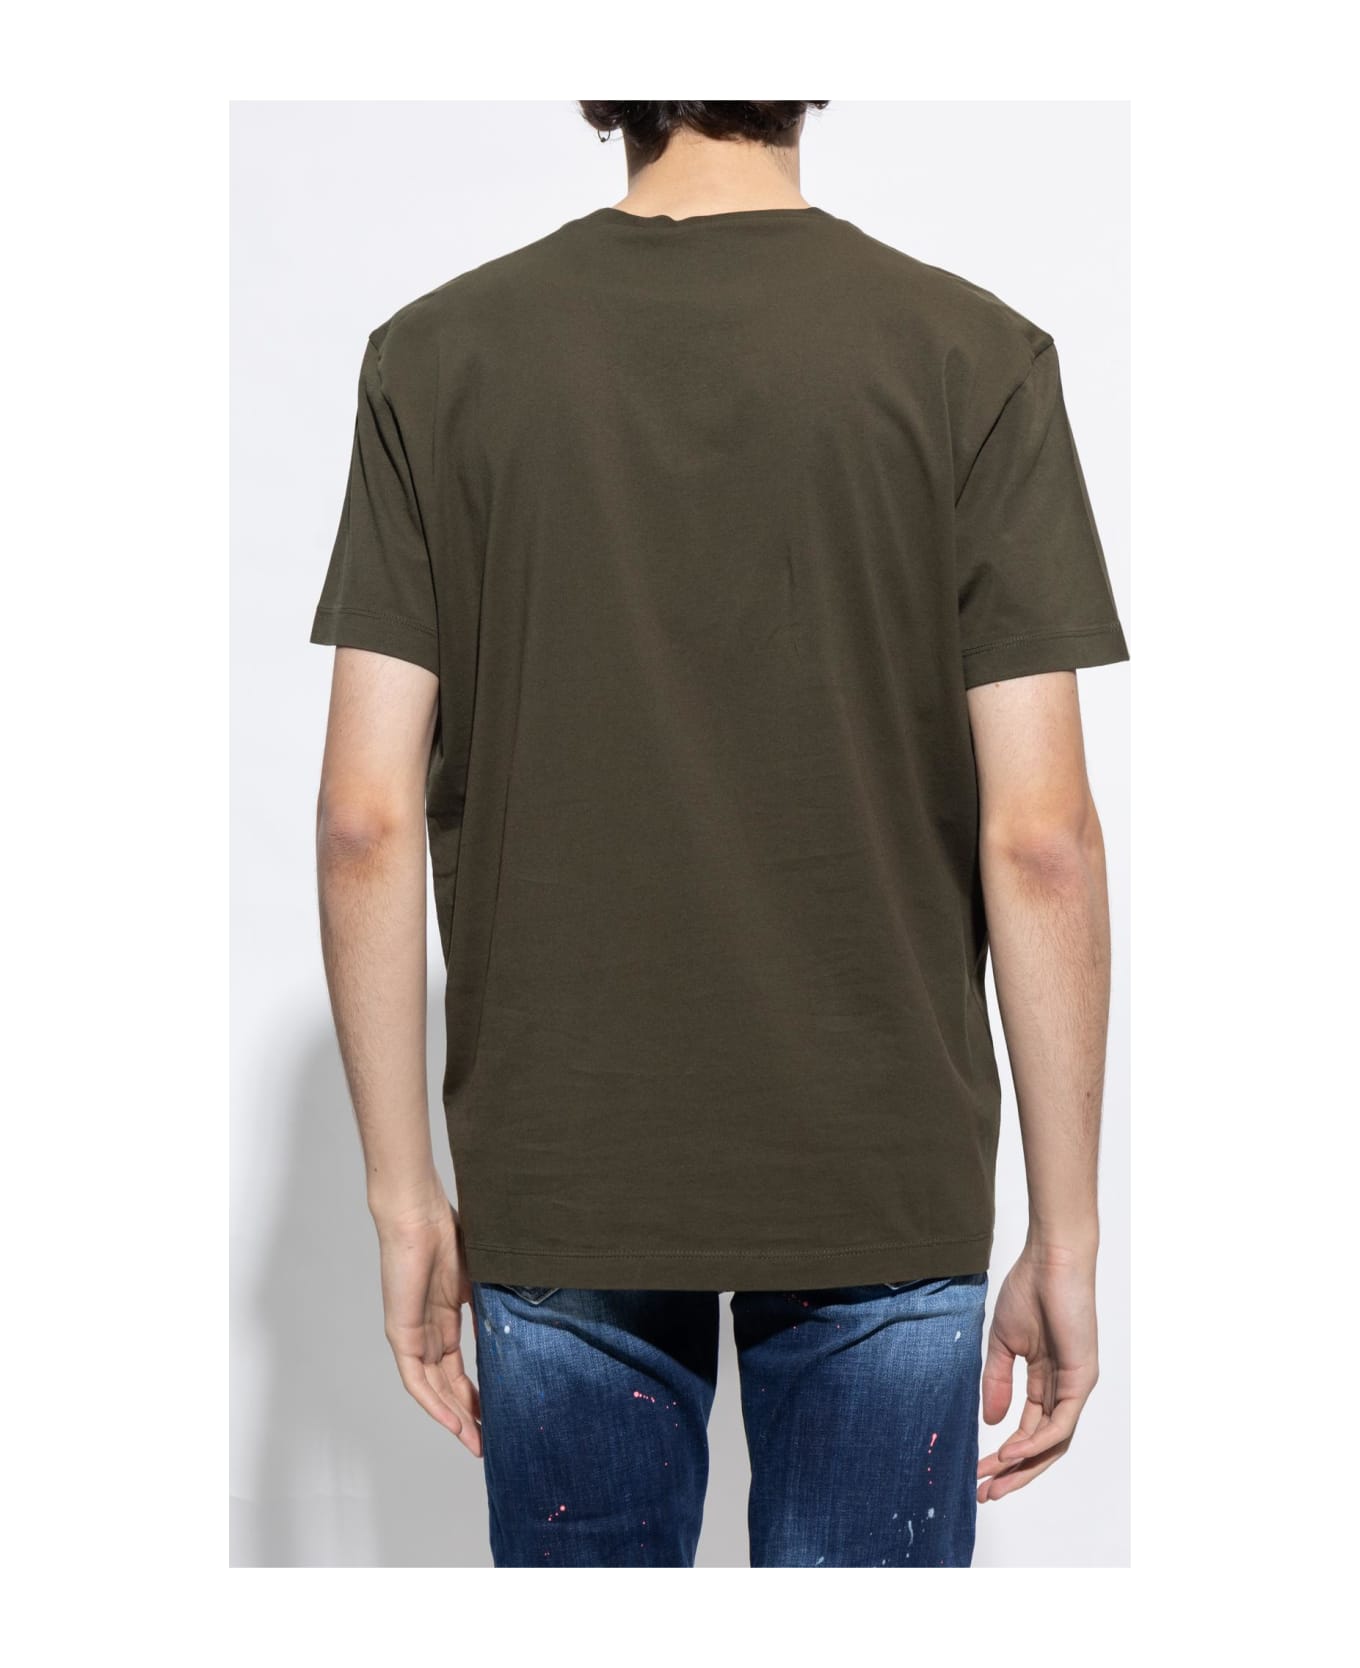 Dsquared2 Cotton T-shirt - Military Green シャツ